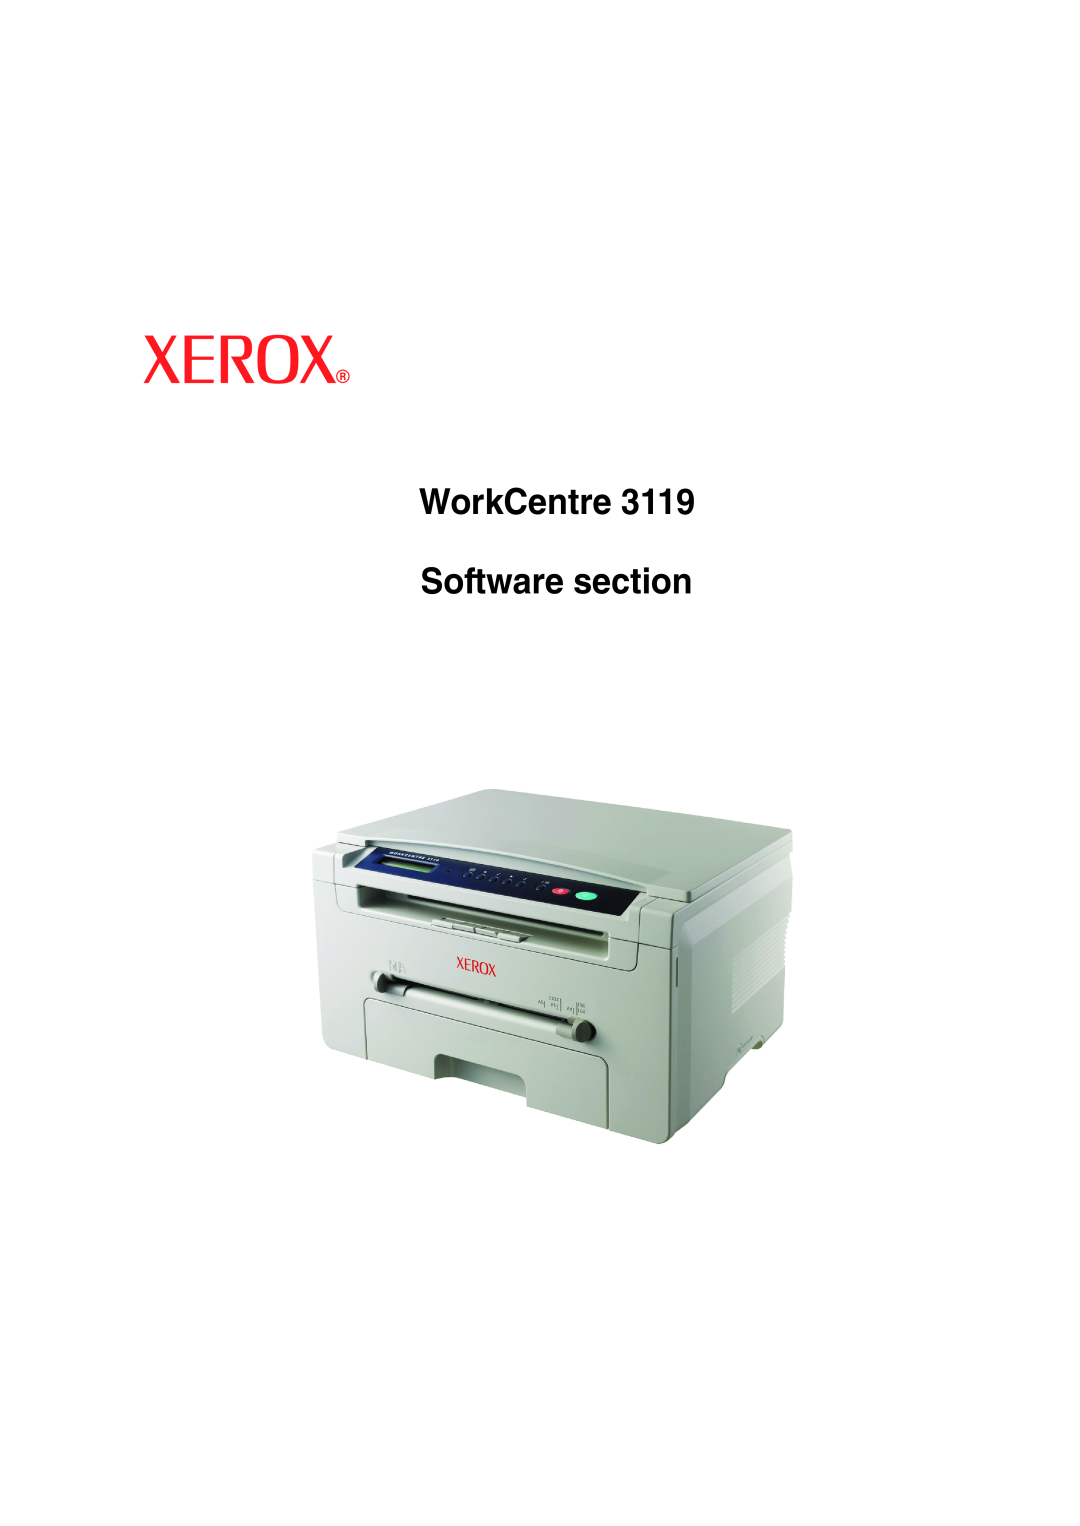 Xerox 3119 manual Software section, WorkCentre 